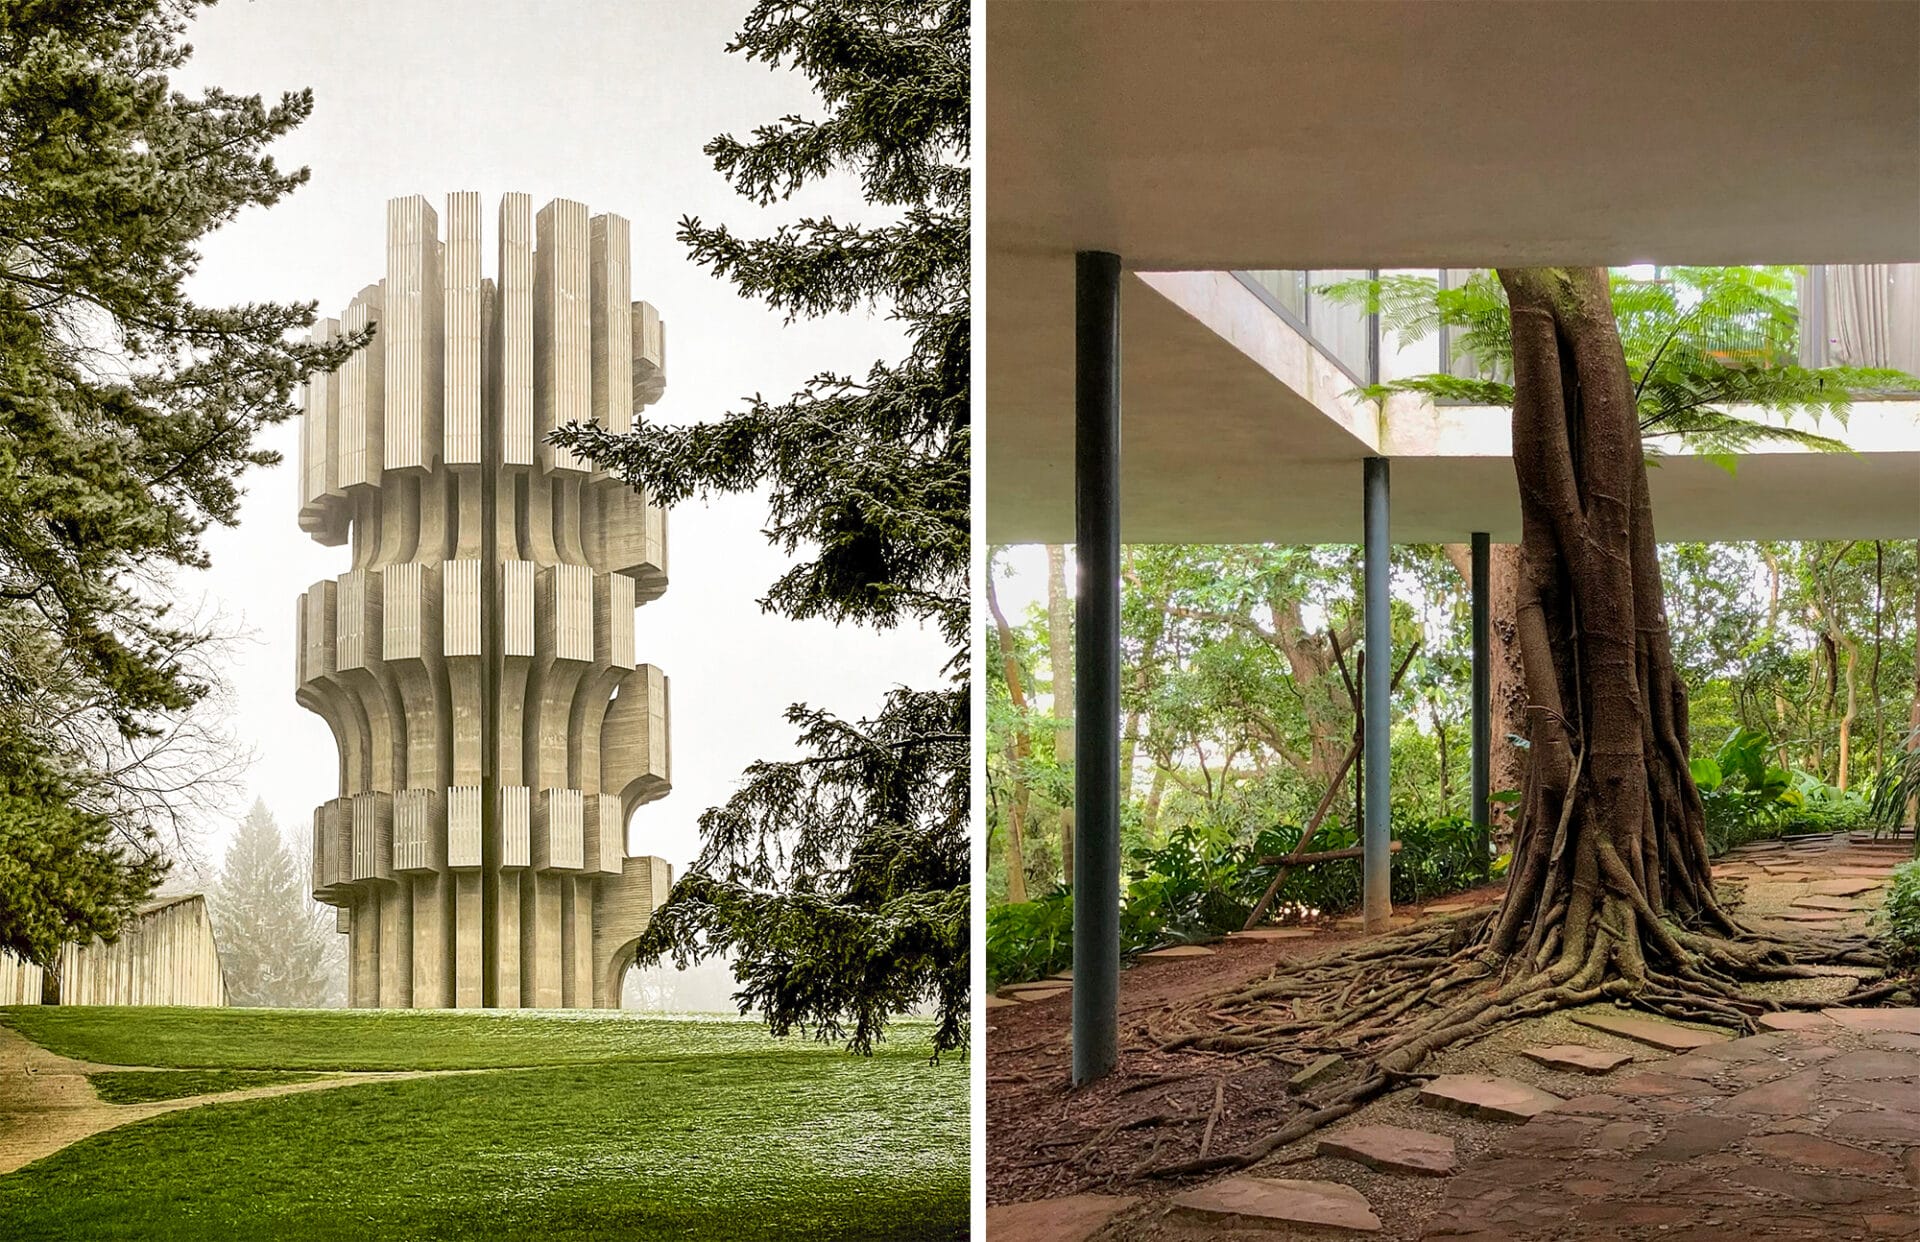 a side-by-side image showing brutalist architecture and greenery, with the image on the left of a concrete tower in a green estate, and the image on the right showing a tree growing in an atrium